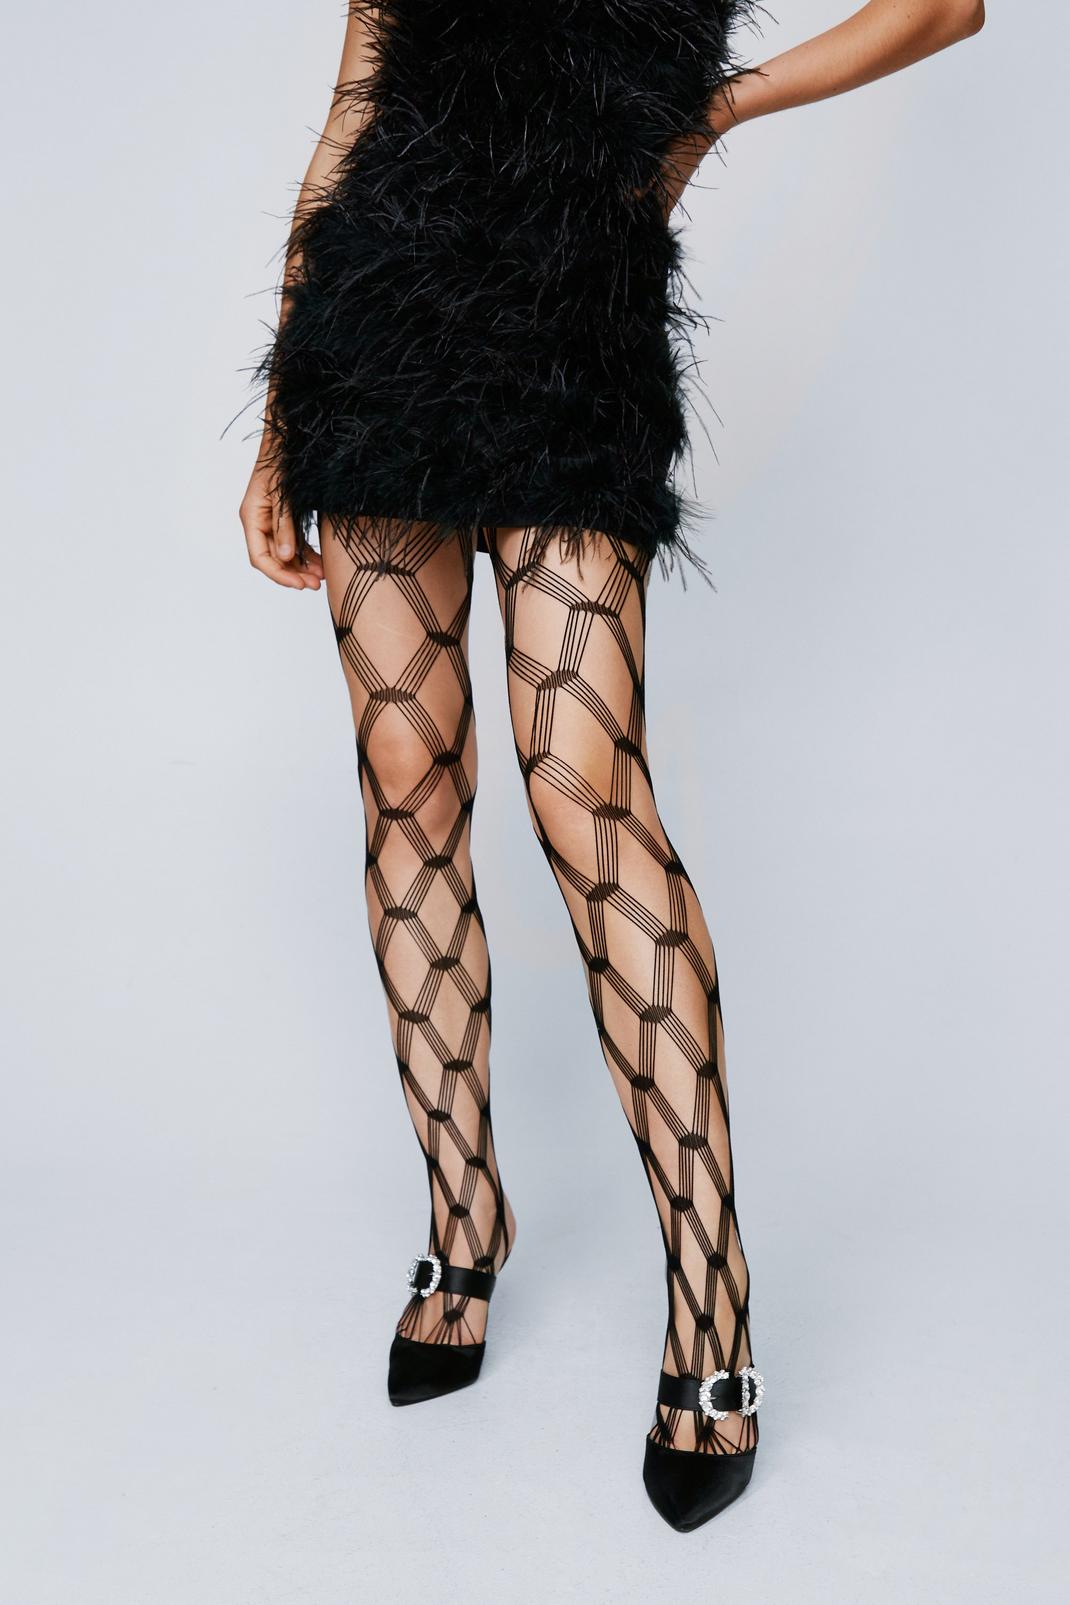 Friday Fashion Fits: How to Wear the Patterned Tights Trend in